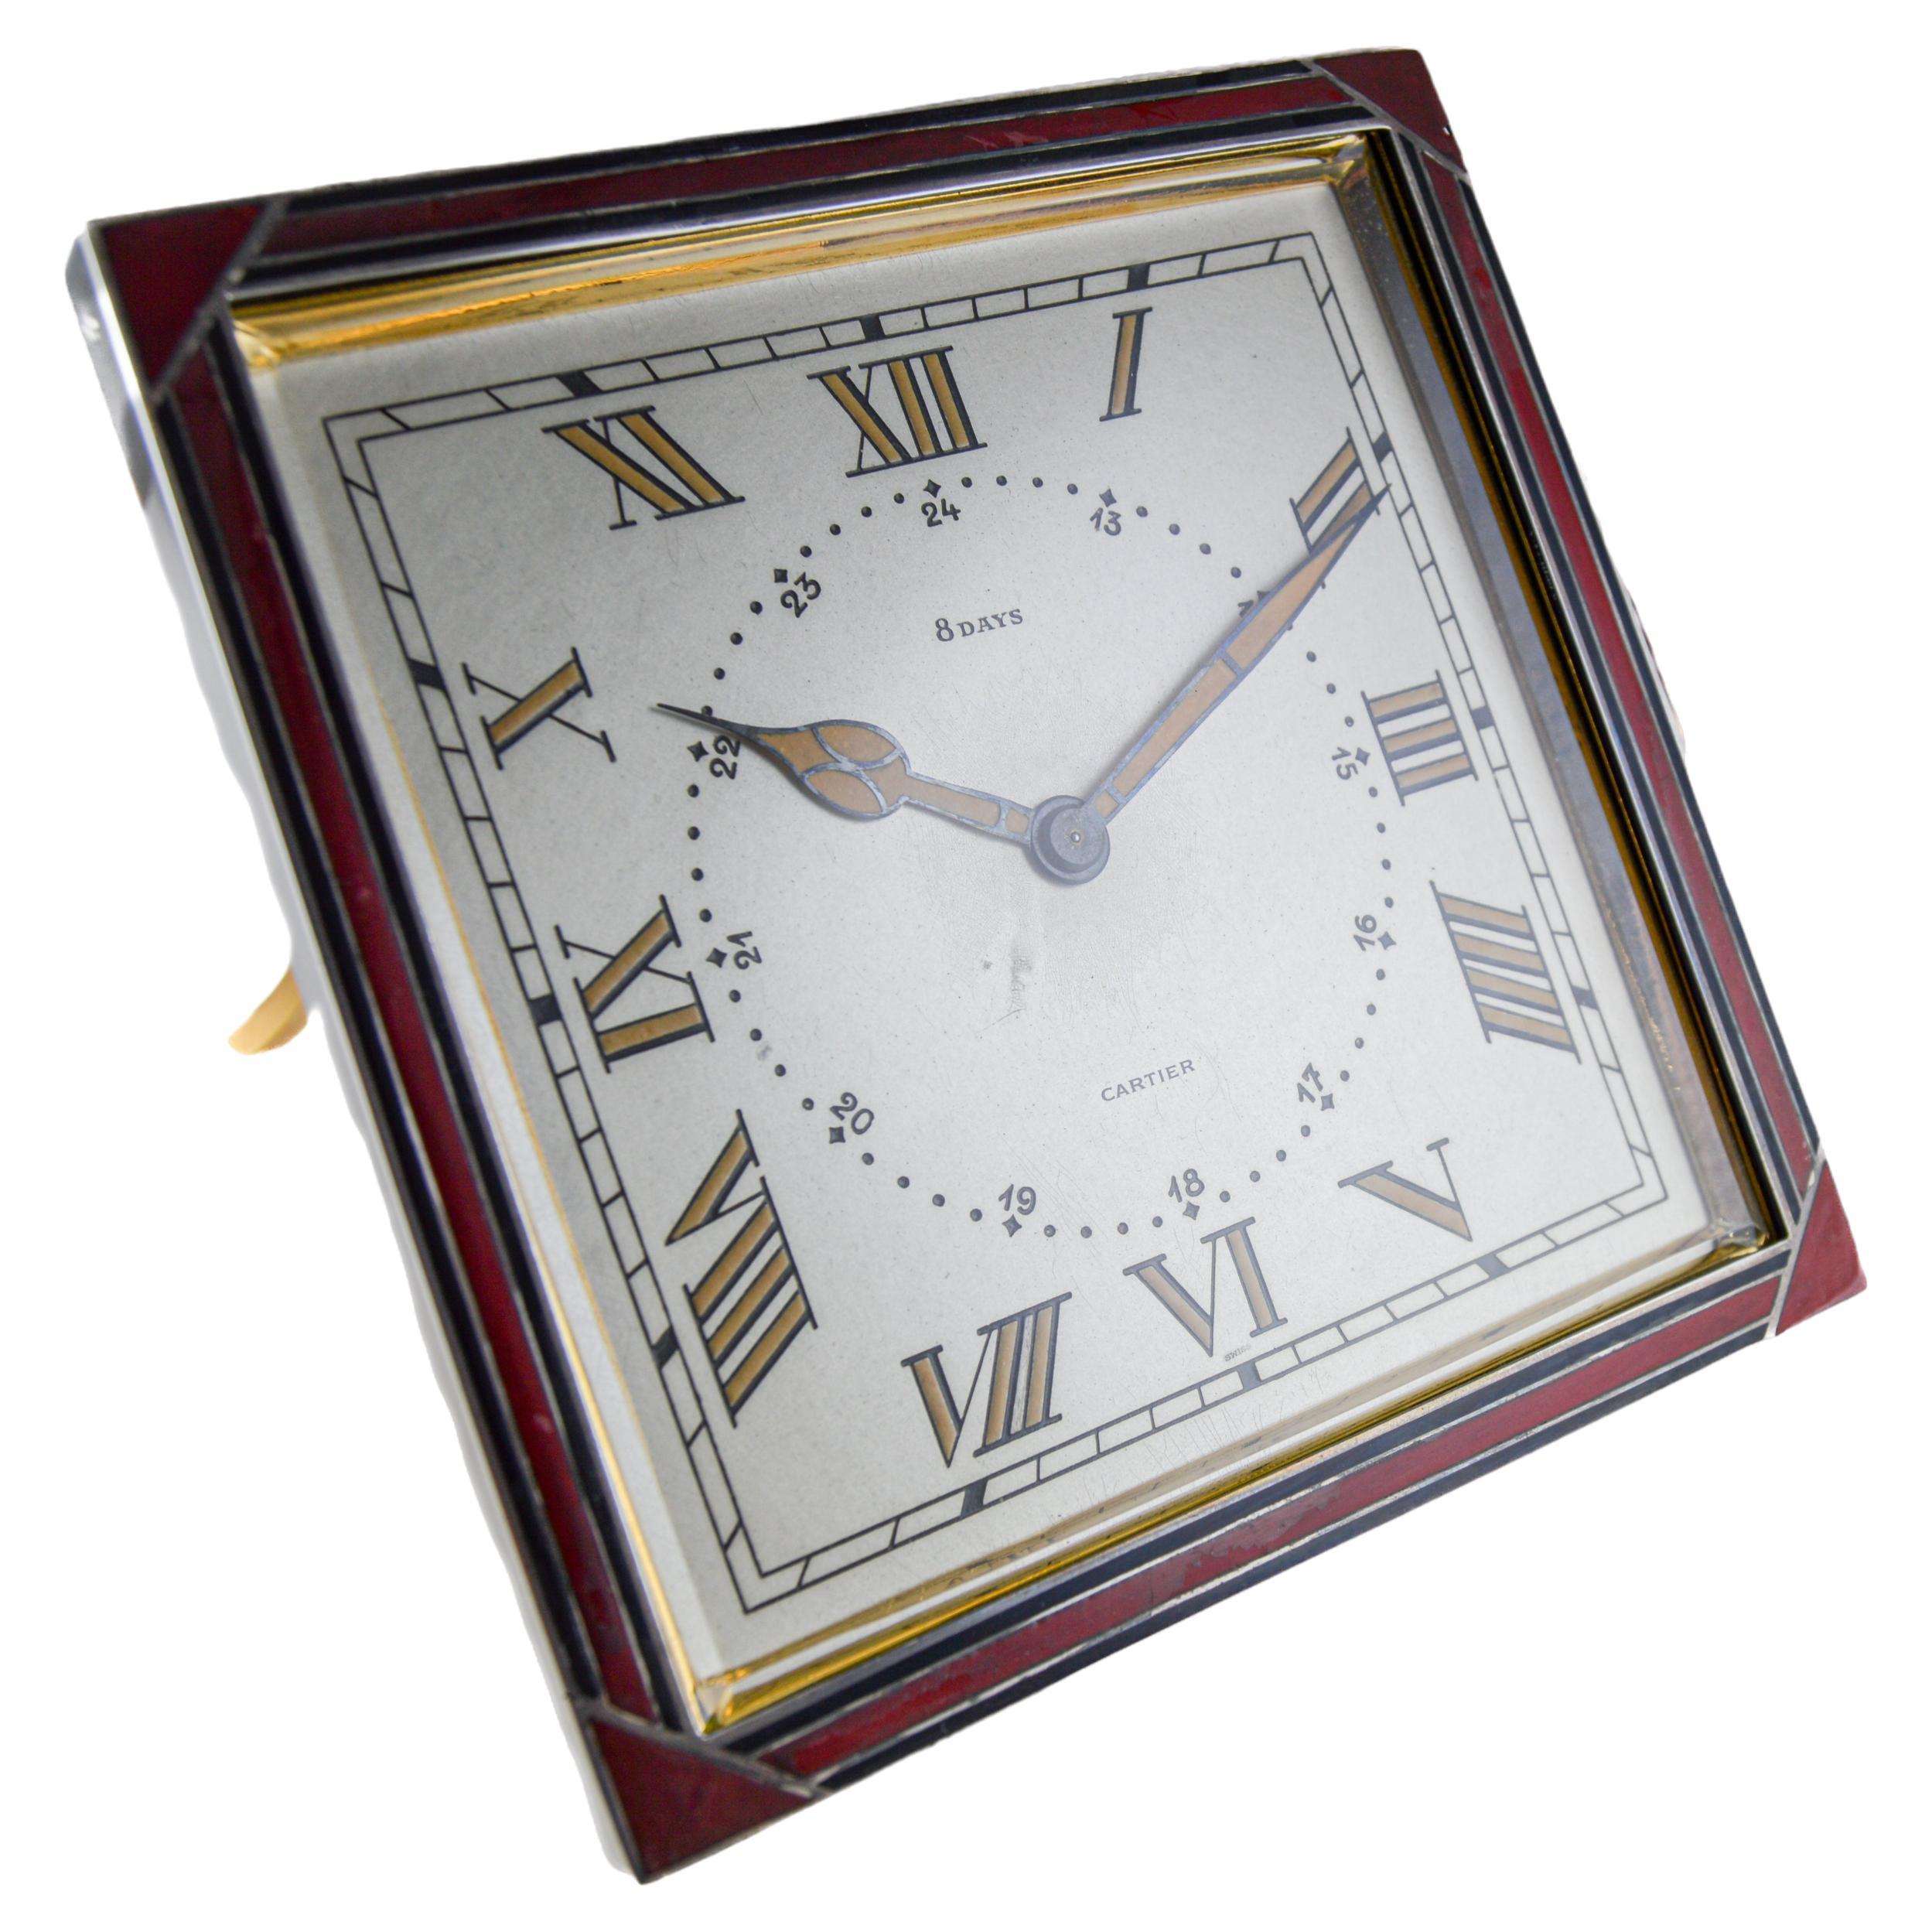 Cartier Sterling and Enamel Art Deco Desk Clock with Breguet Engine Turned Dial For Sale 5